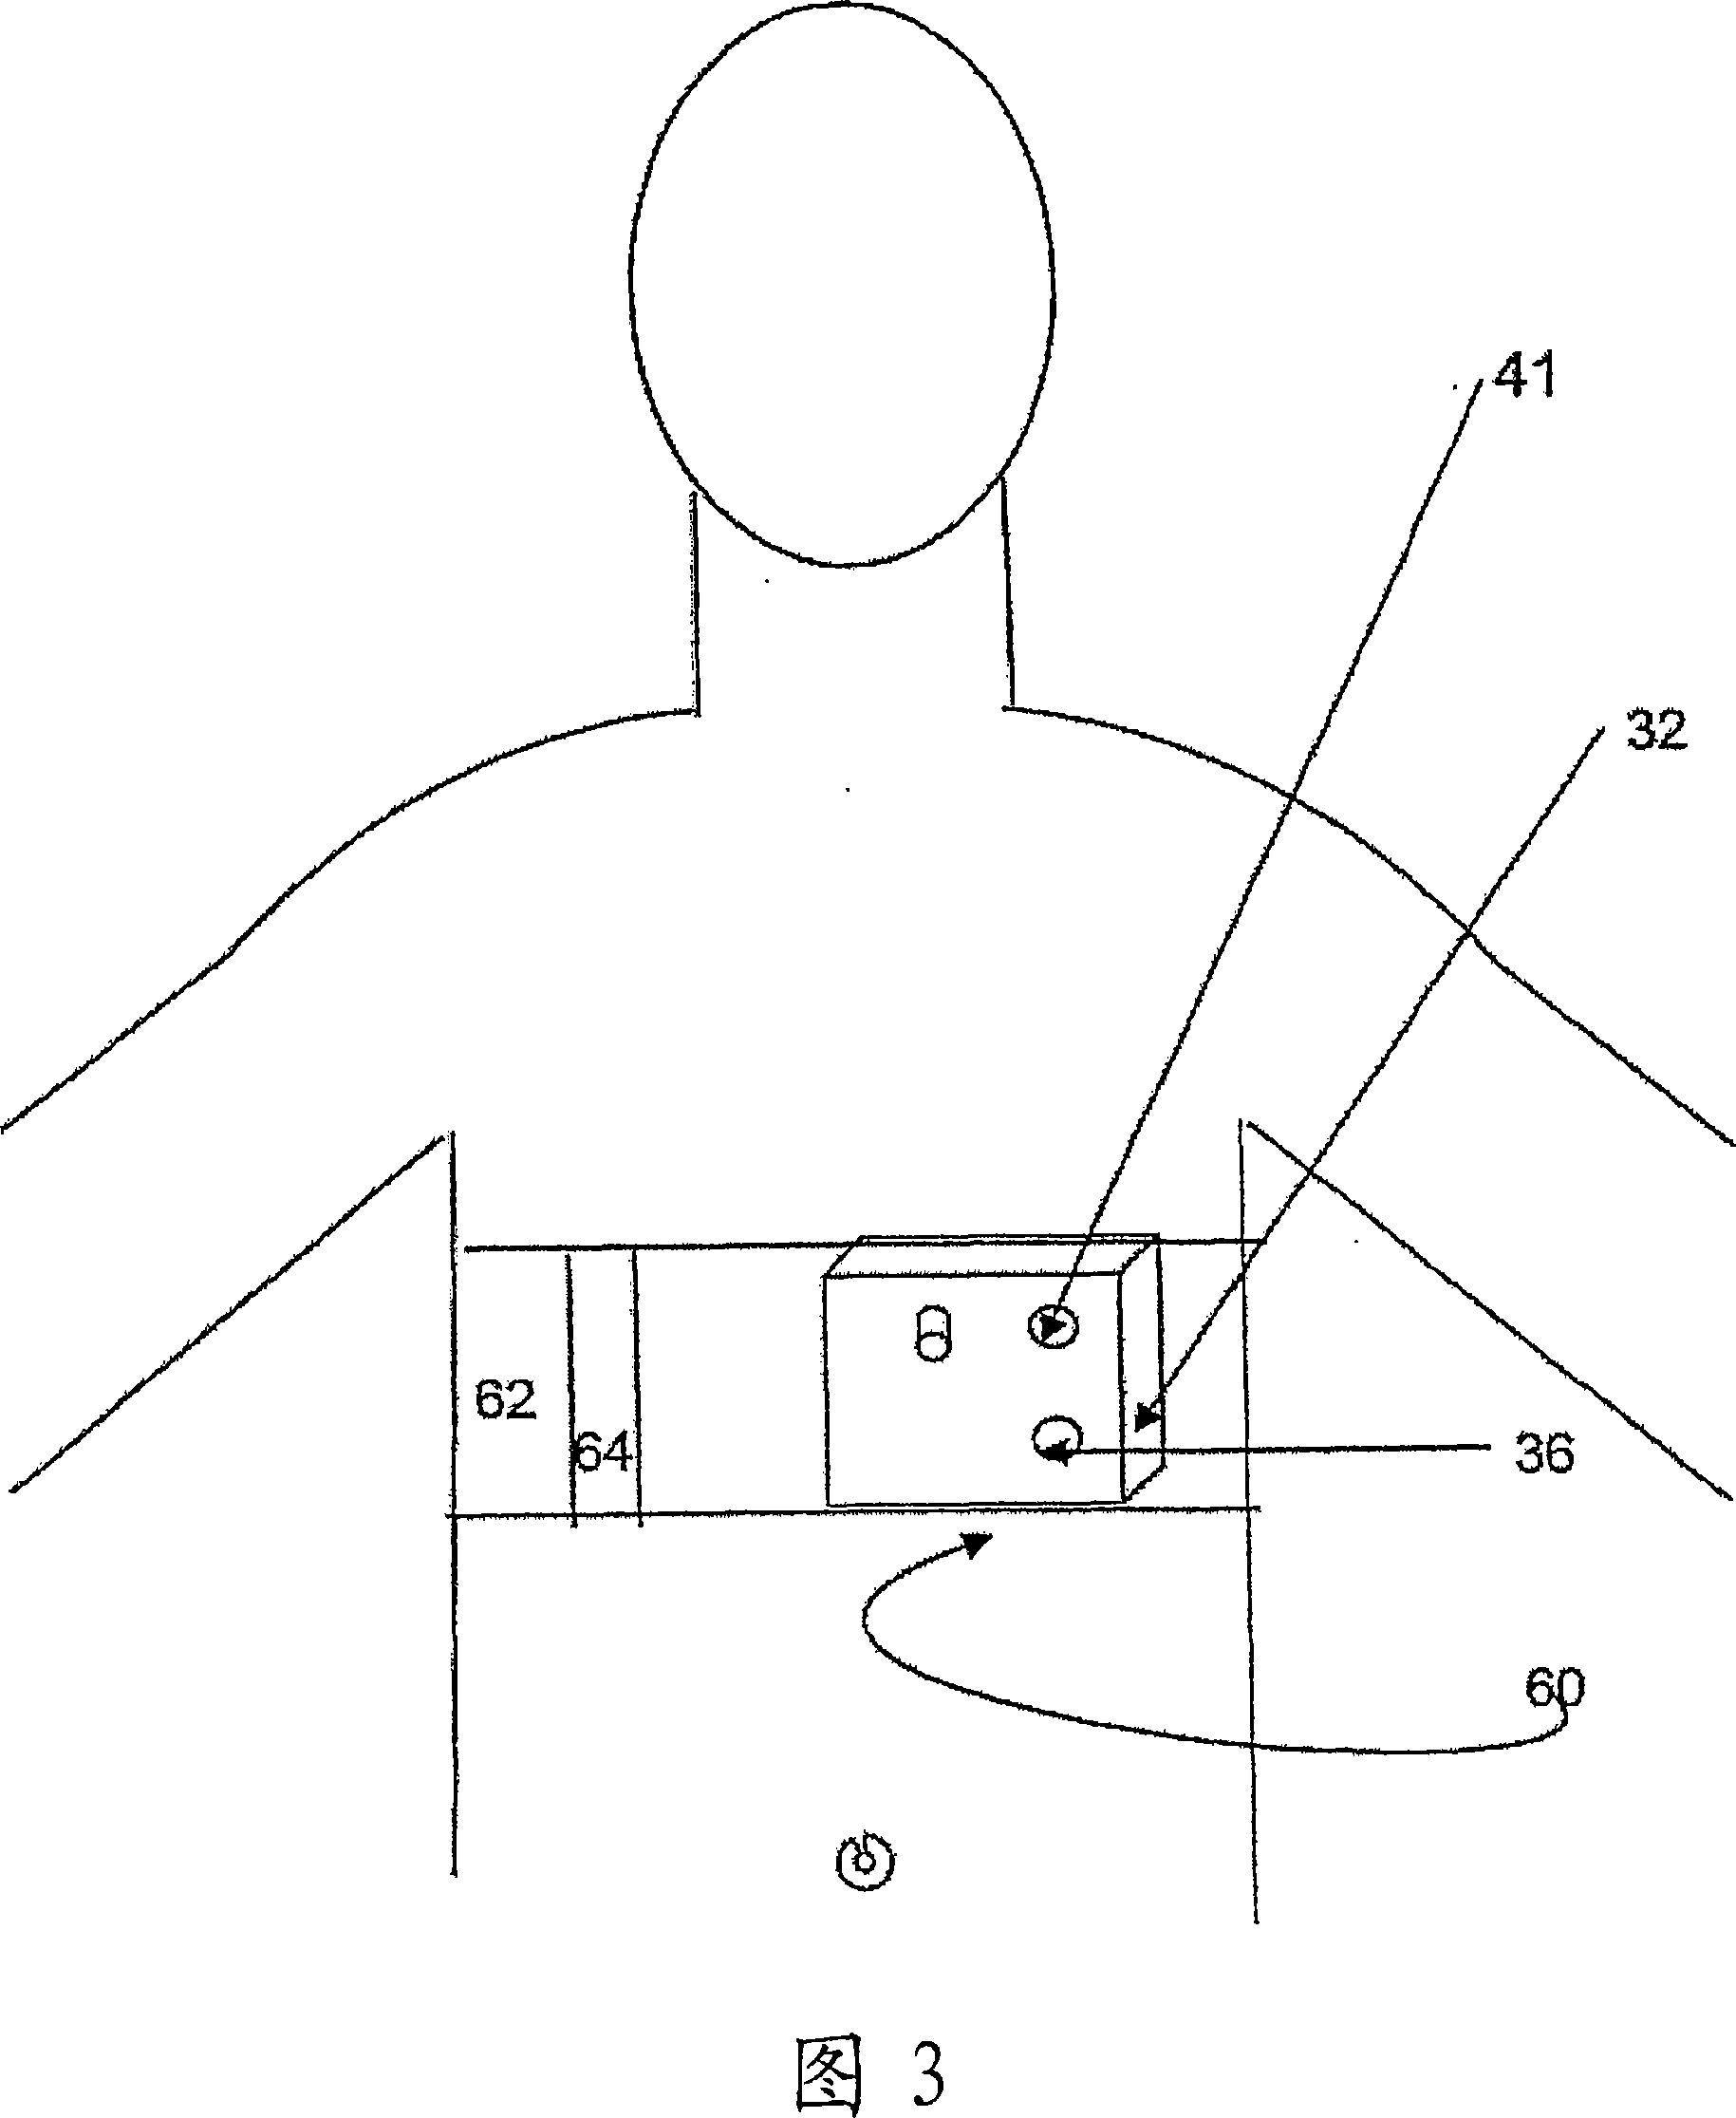 System for continuous blood pressure monitoring